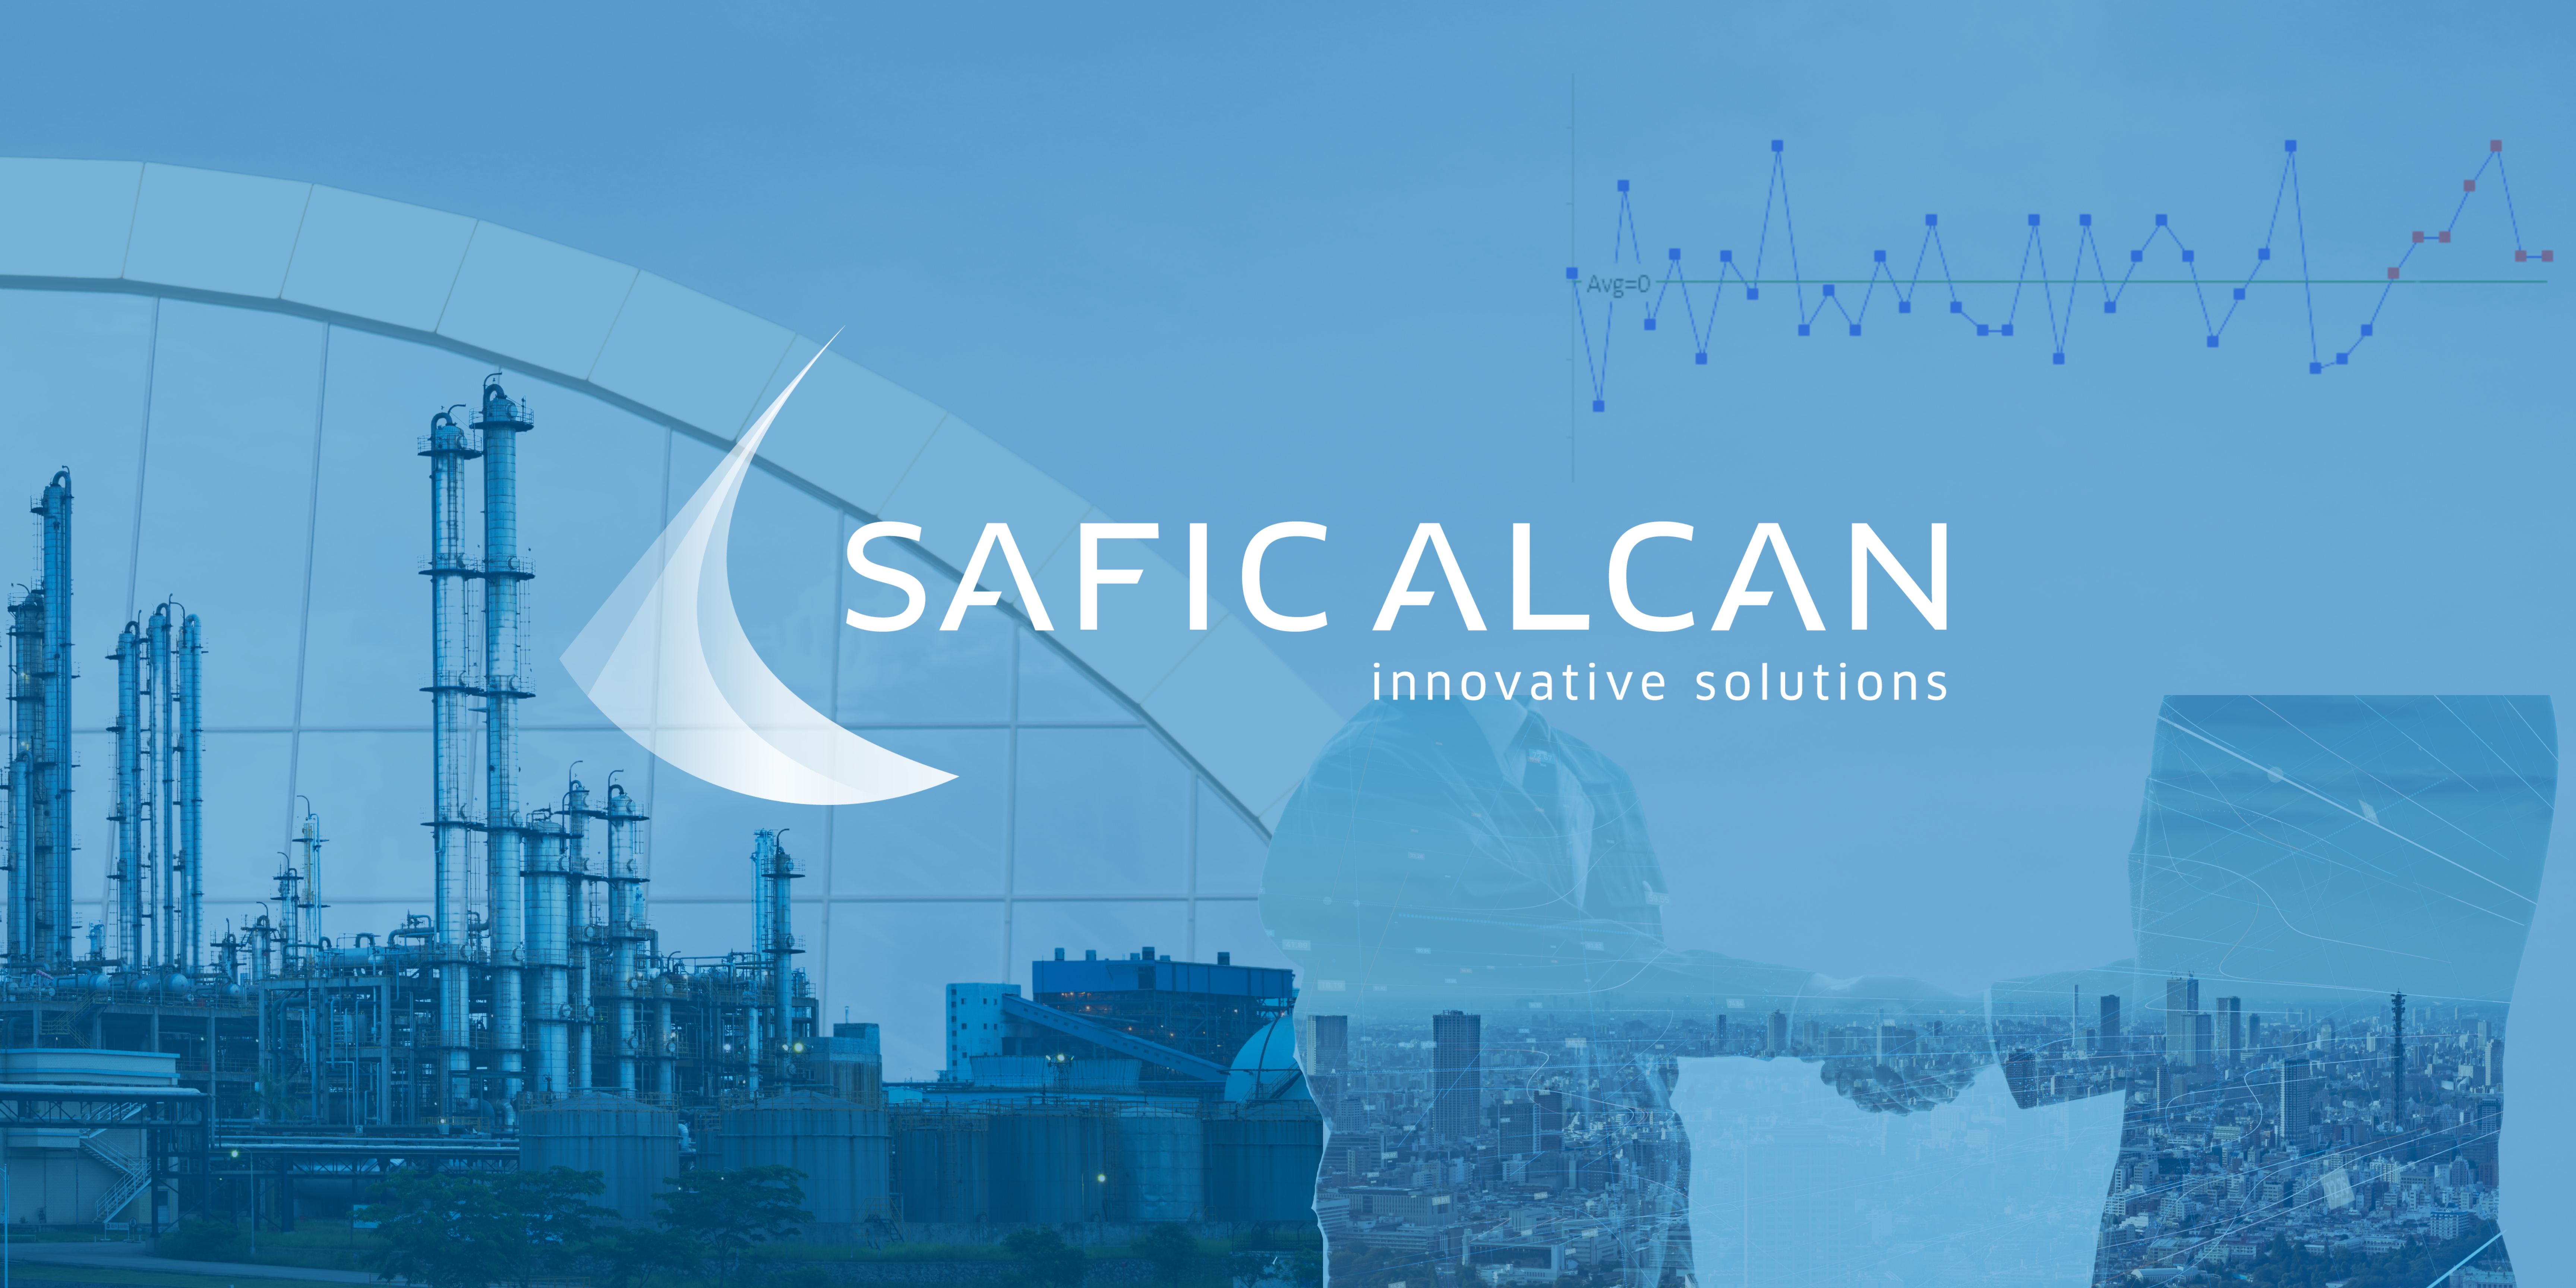 Safic-Alcan - May 2nd - from 13:30 to 14:30- in person Physics and Chemistry Building